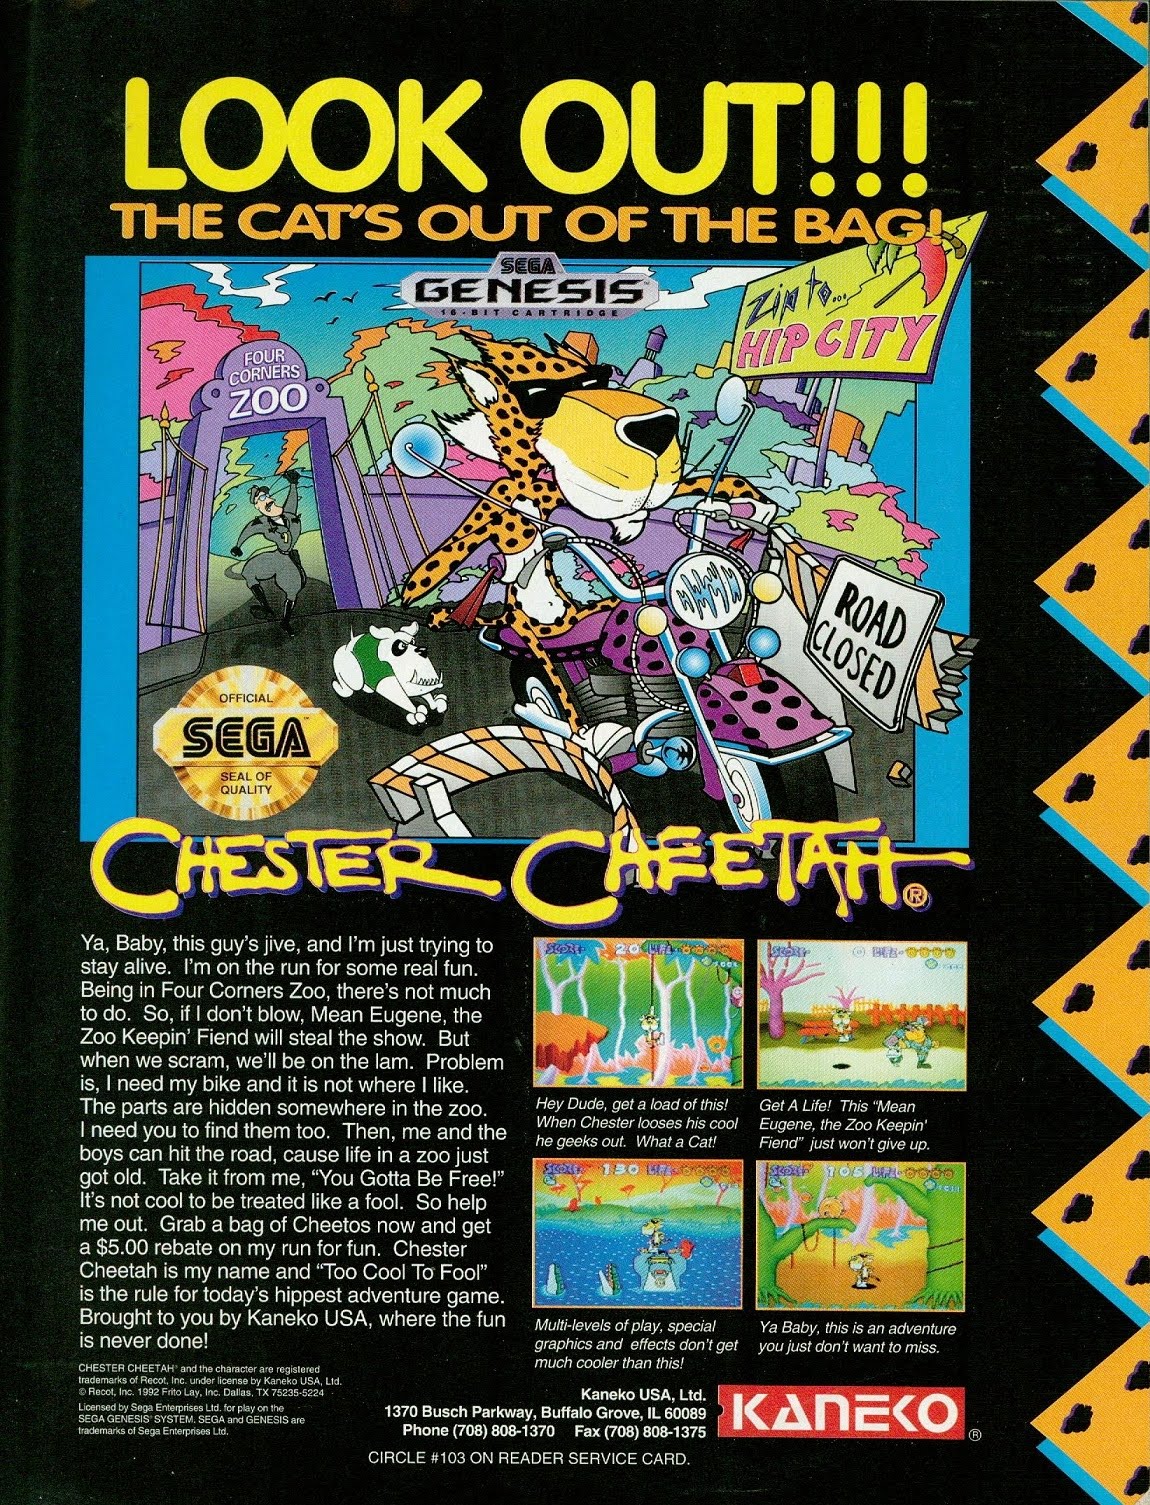 vintage gaming ads - snes - Look Out!!! The Cat'S Out Of The Bage Genesis ashle Sega Hester Scafetar Ya, Baby, this guy' tje, and I'm just thing to stay alive. Im on the run for some rean. Being in Four Conan Zoo, there's not much to do. So, if don't blow